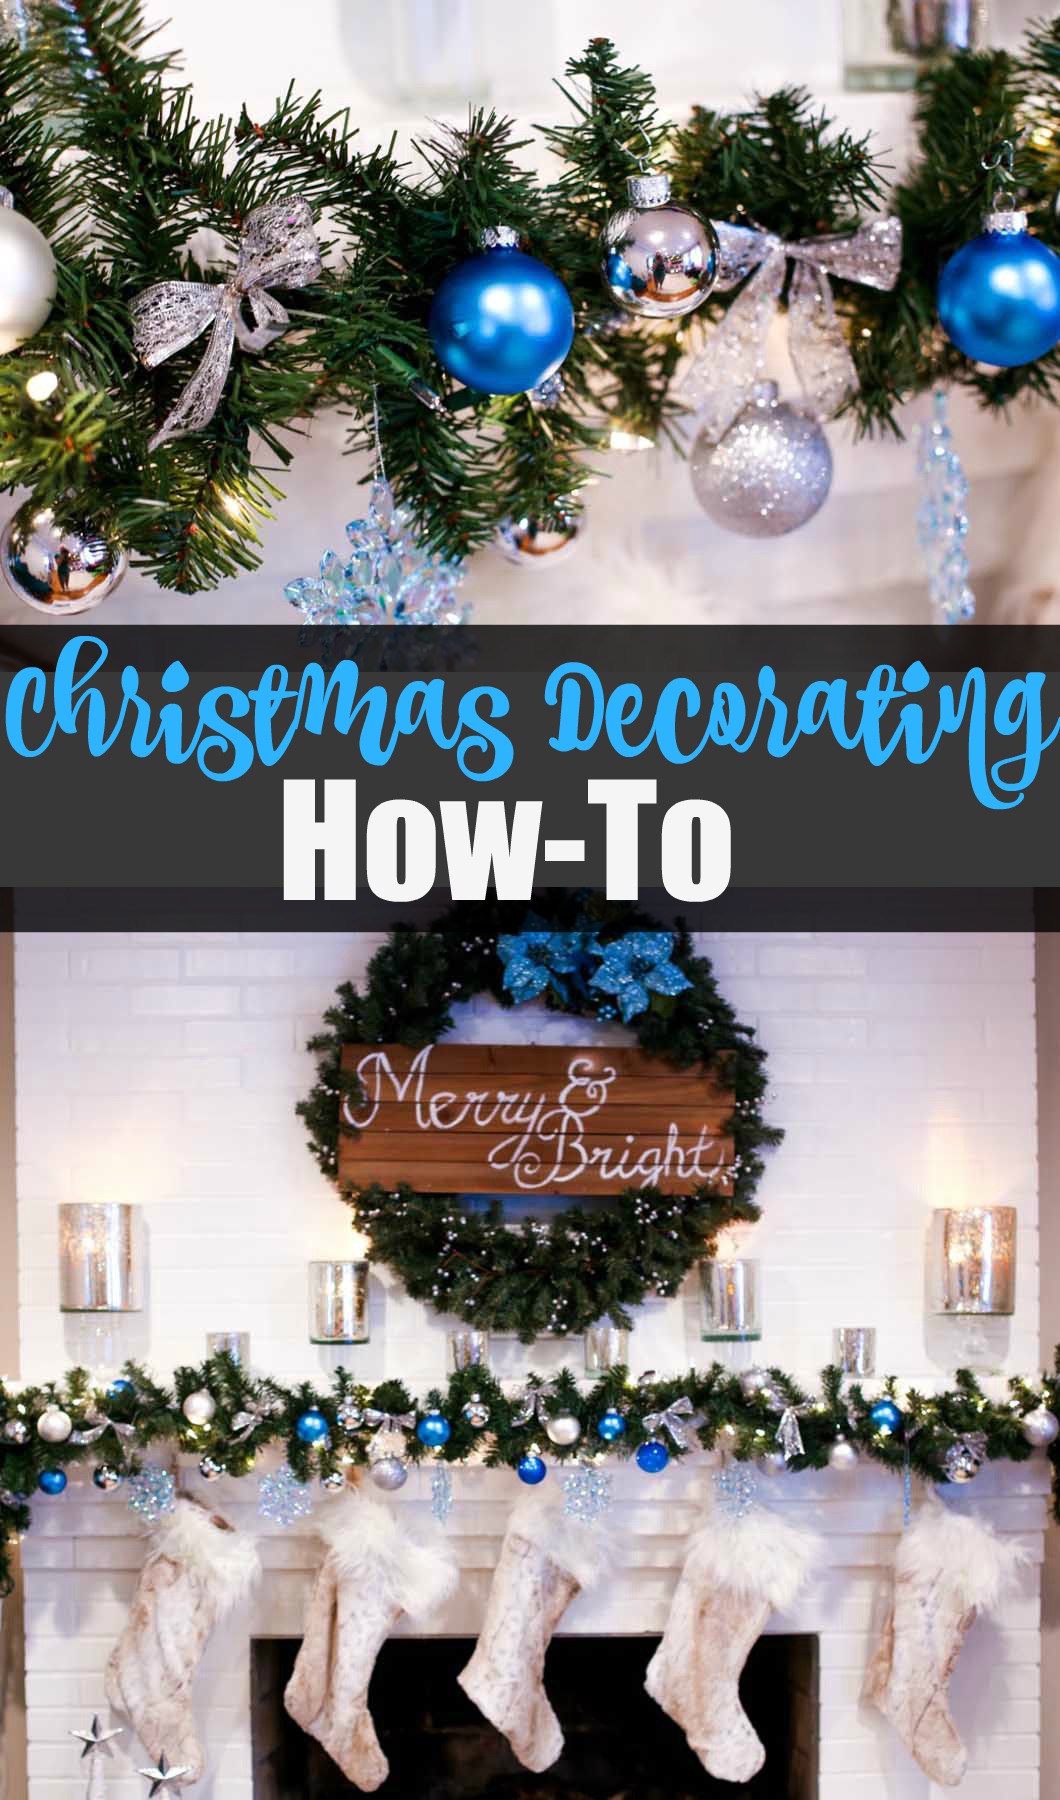 Christmas Mantle Decorating Ideas - Tutorial by Atlanta style blogger Happily Hughes